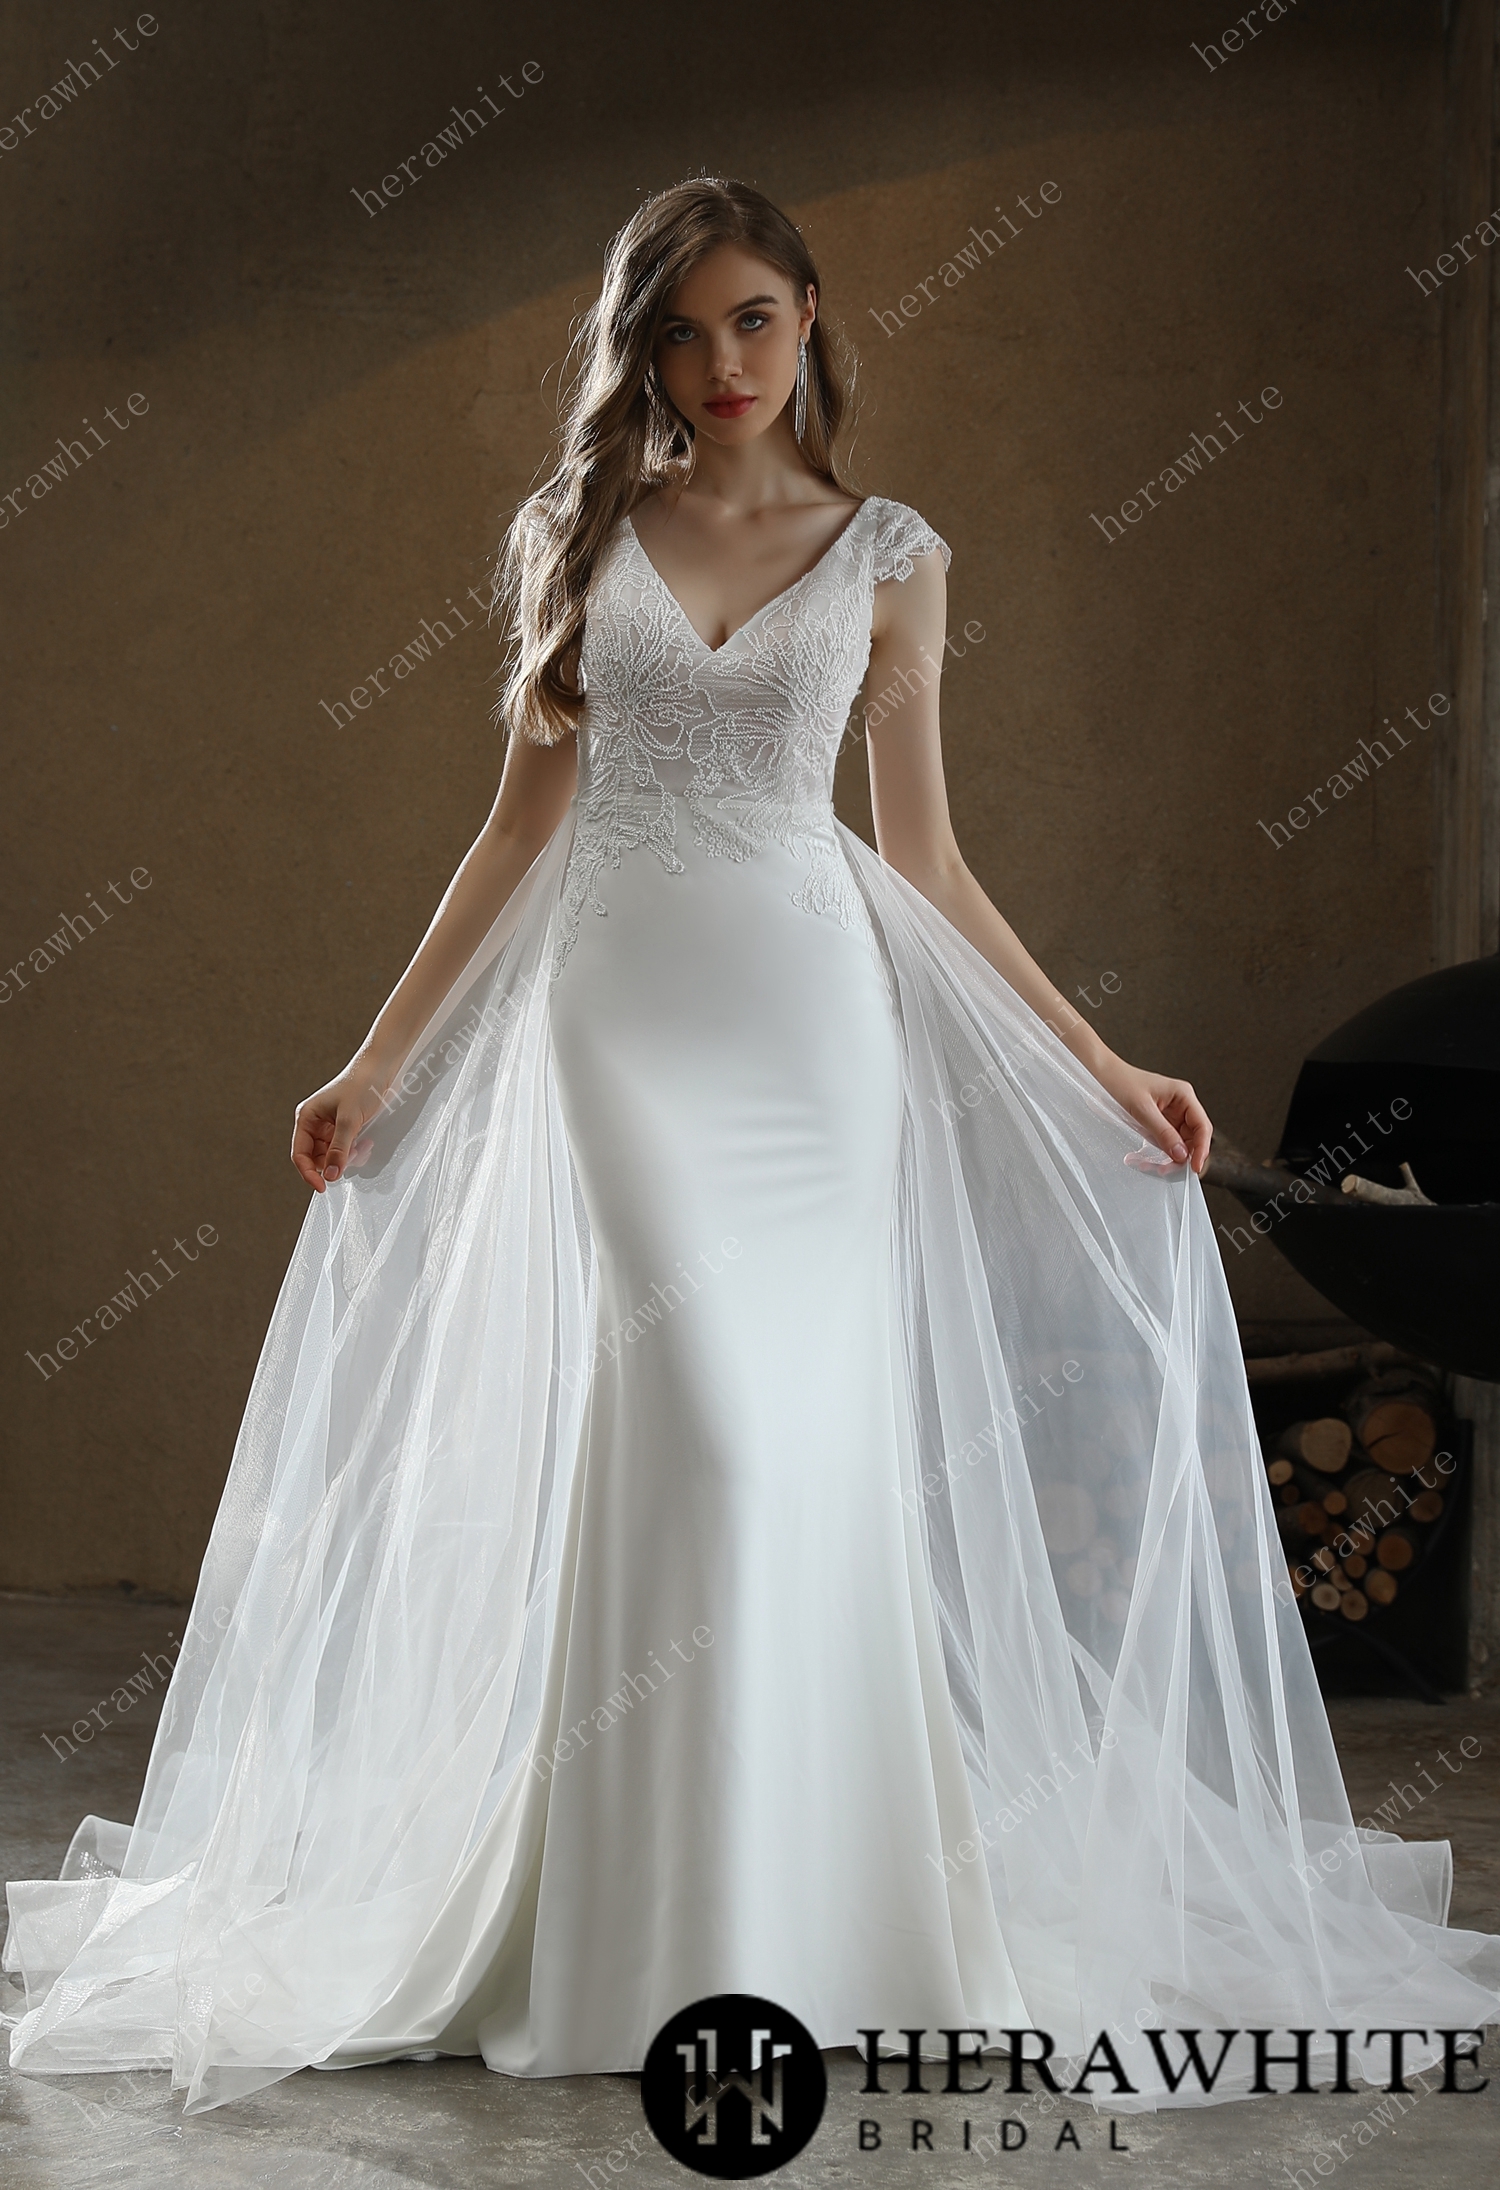 Crepe Sheath Lace Cap Sleeves Wedding Dress With Overskirt